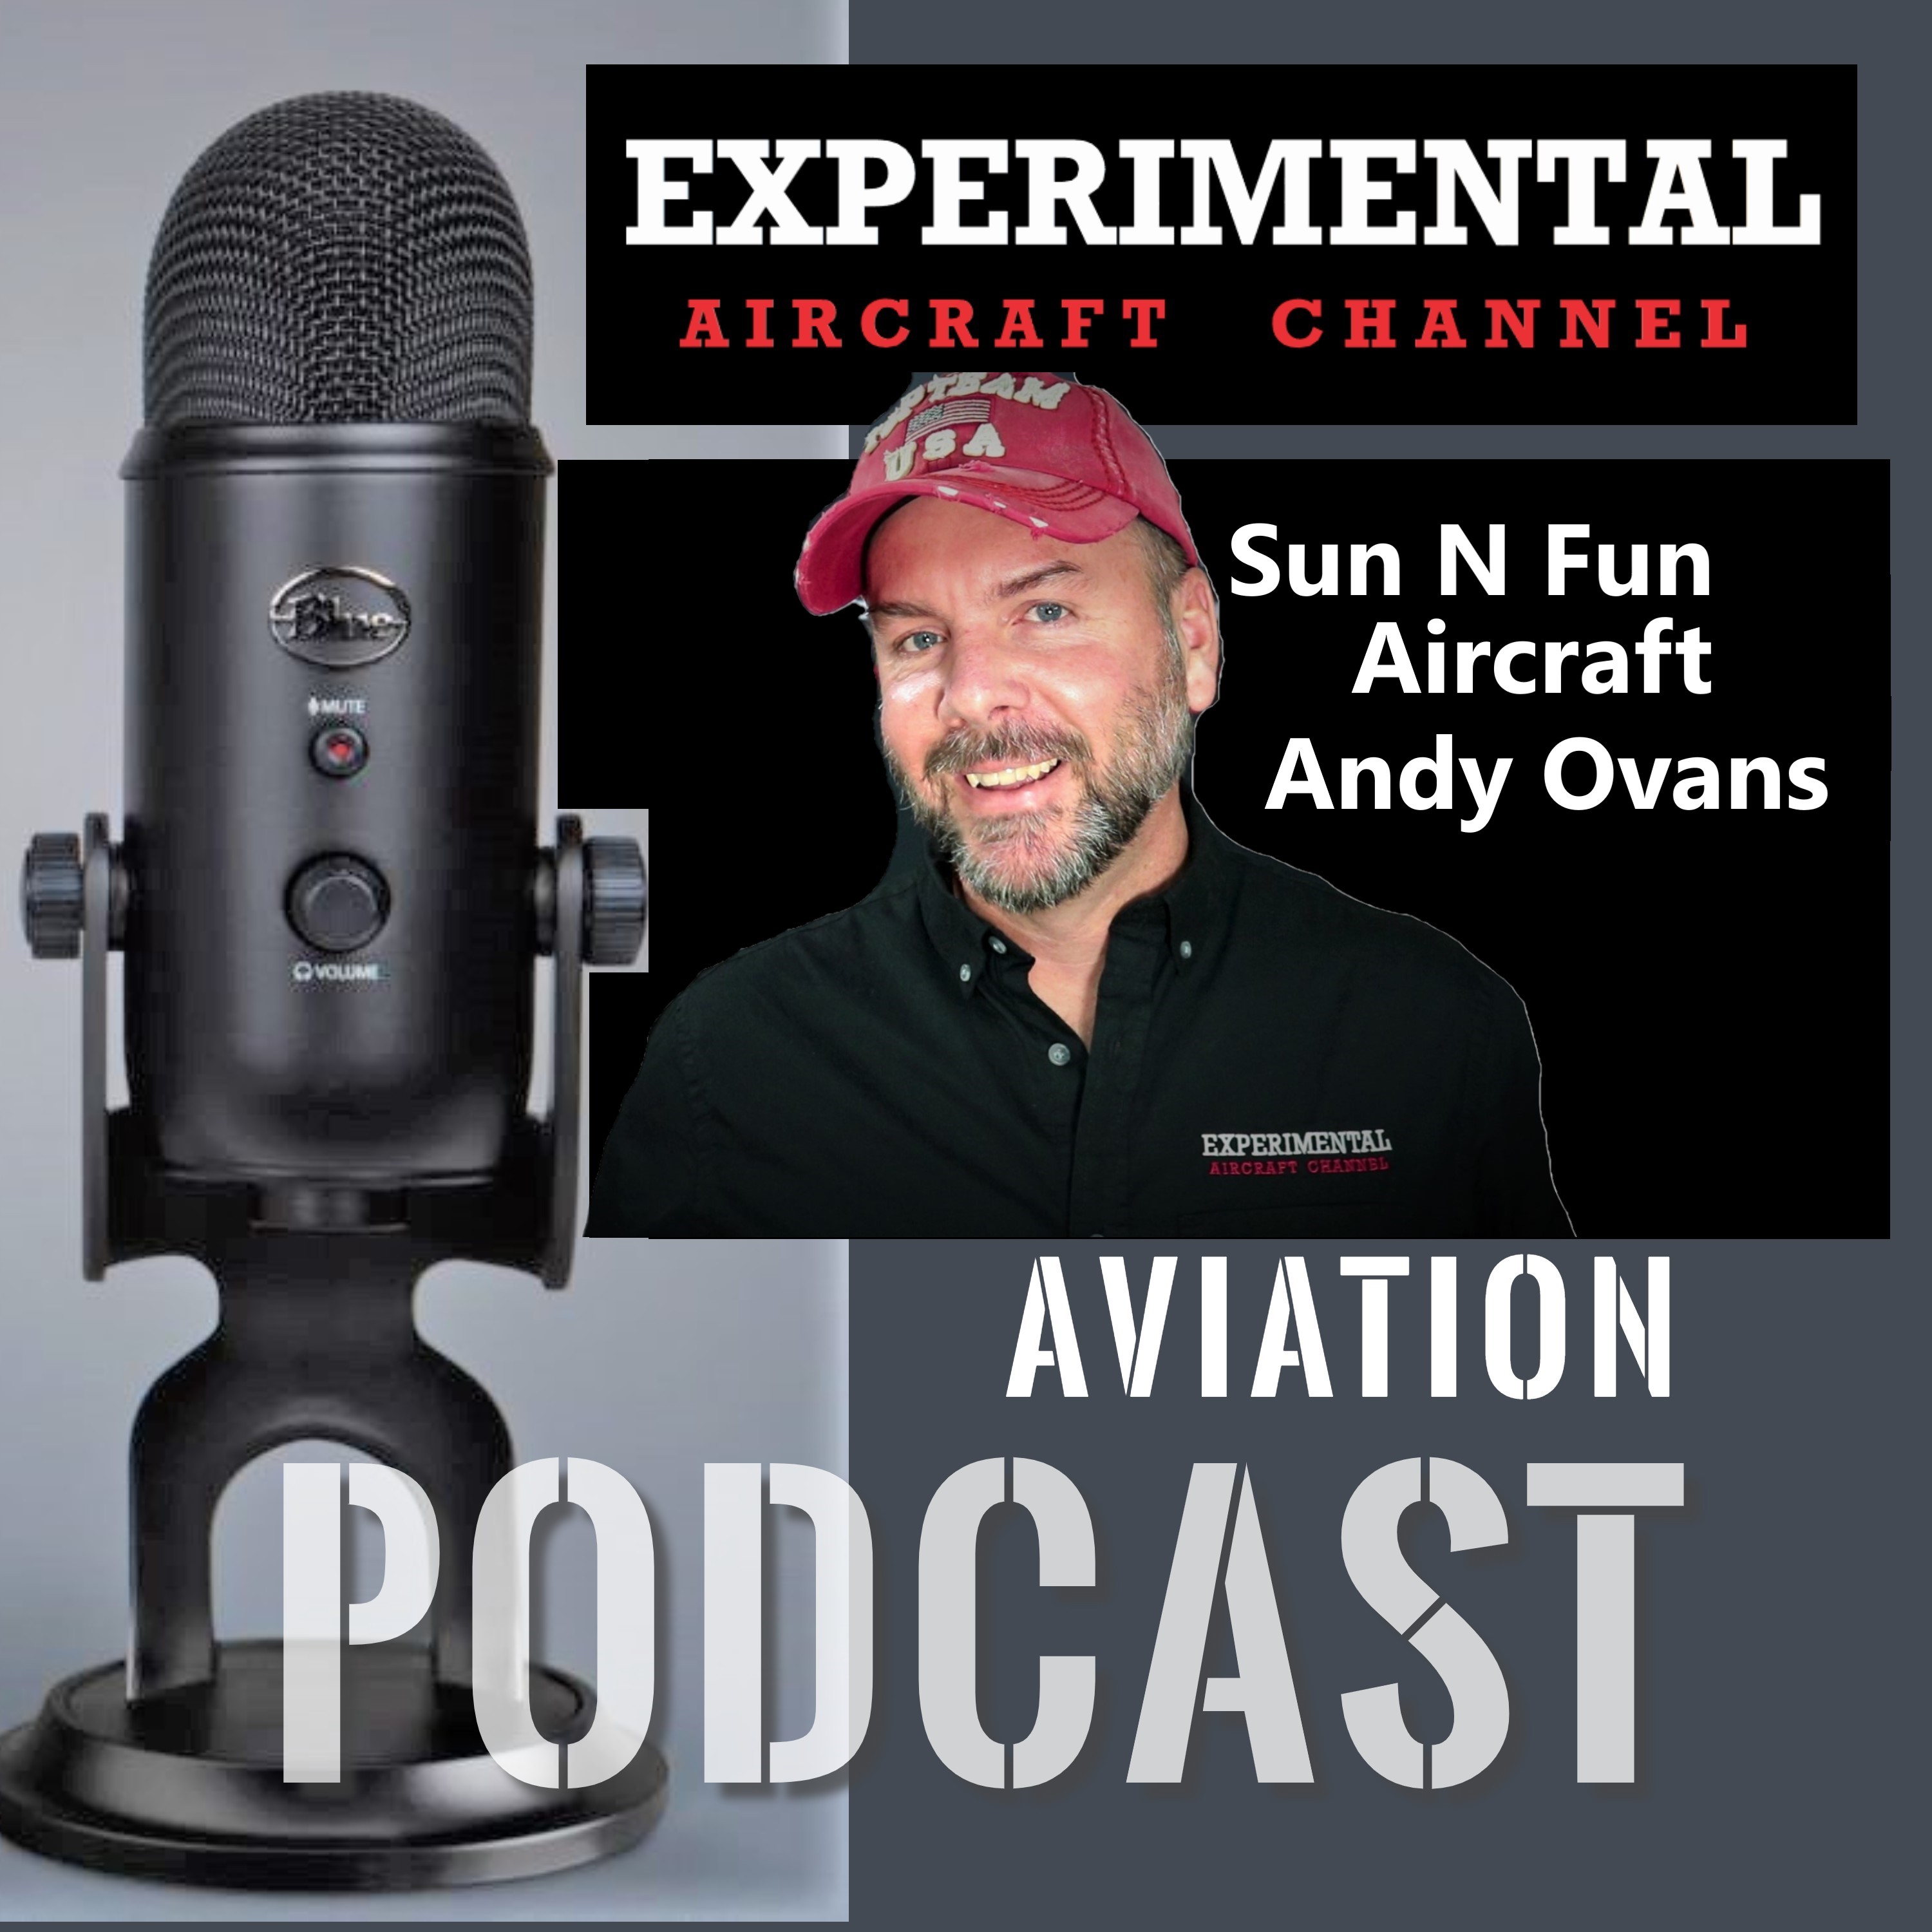 Sun N Fun Aircraft Behind the Scenes with Andy Ovans